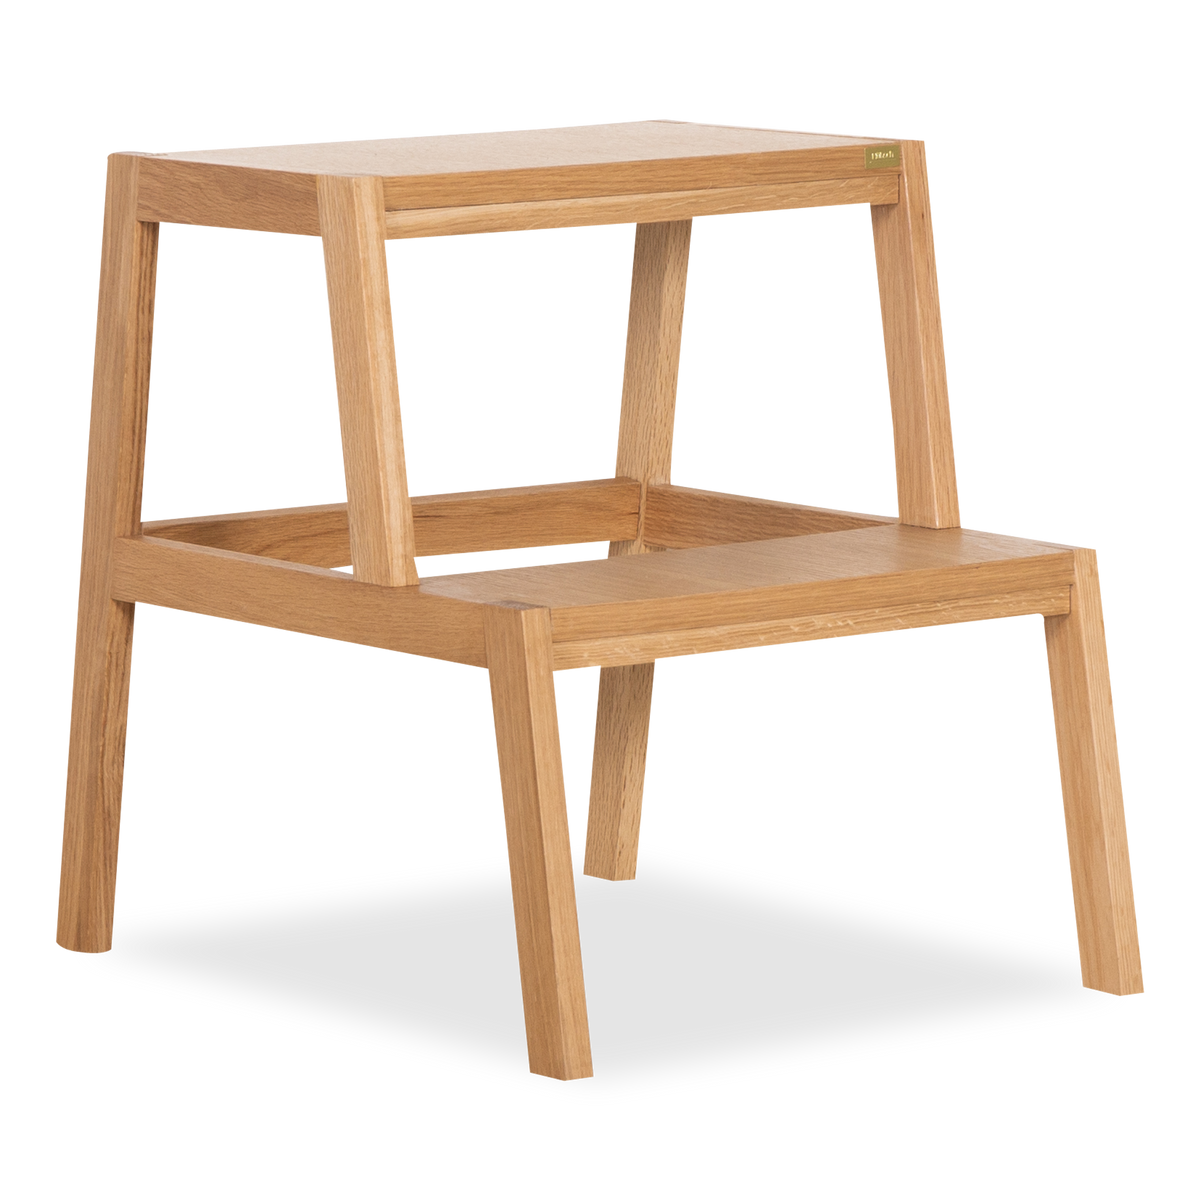 Taking elements from minimalistic design, the Oak Step Stool proudly displays its natural grain and its warm, pleasant tone.